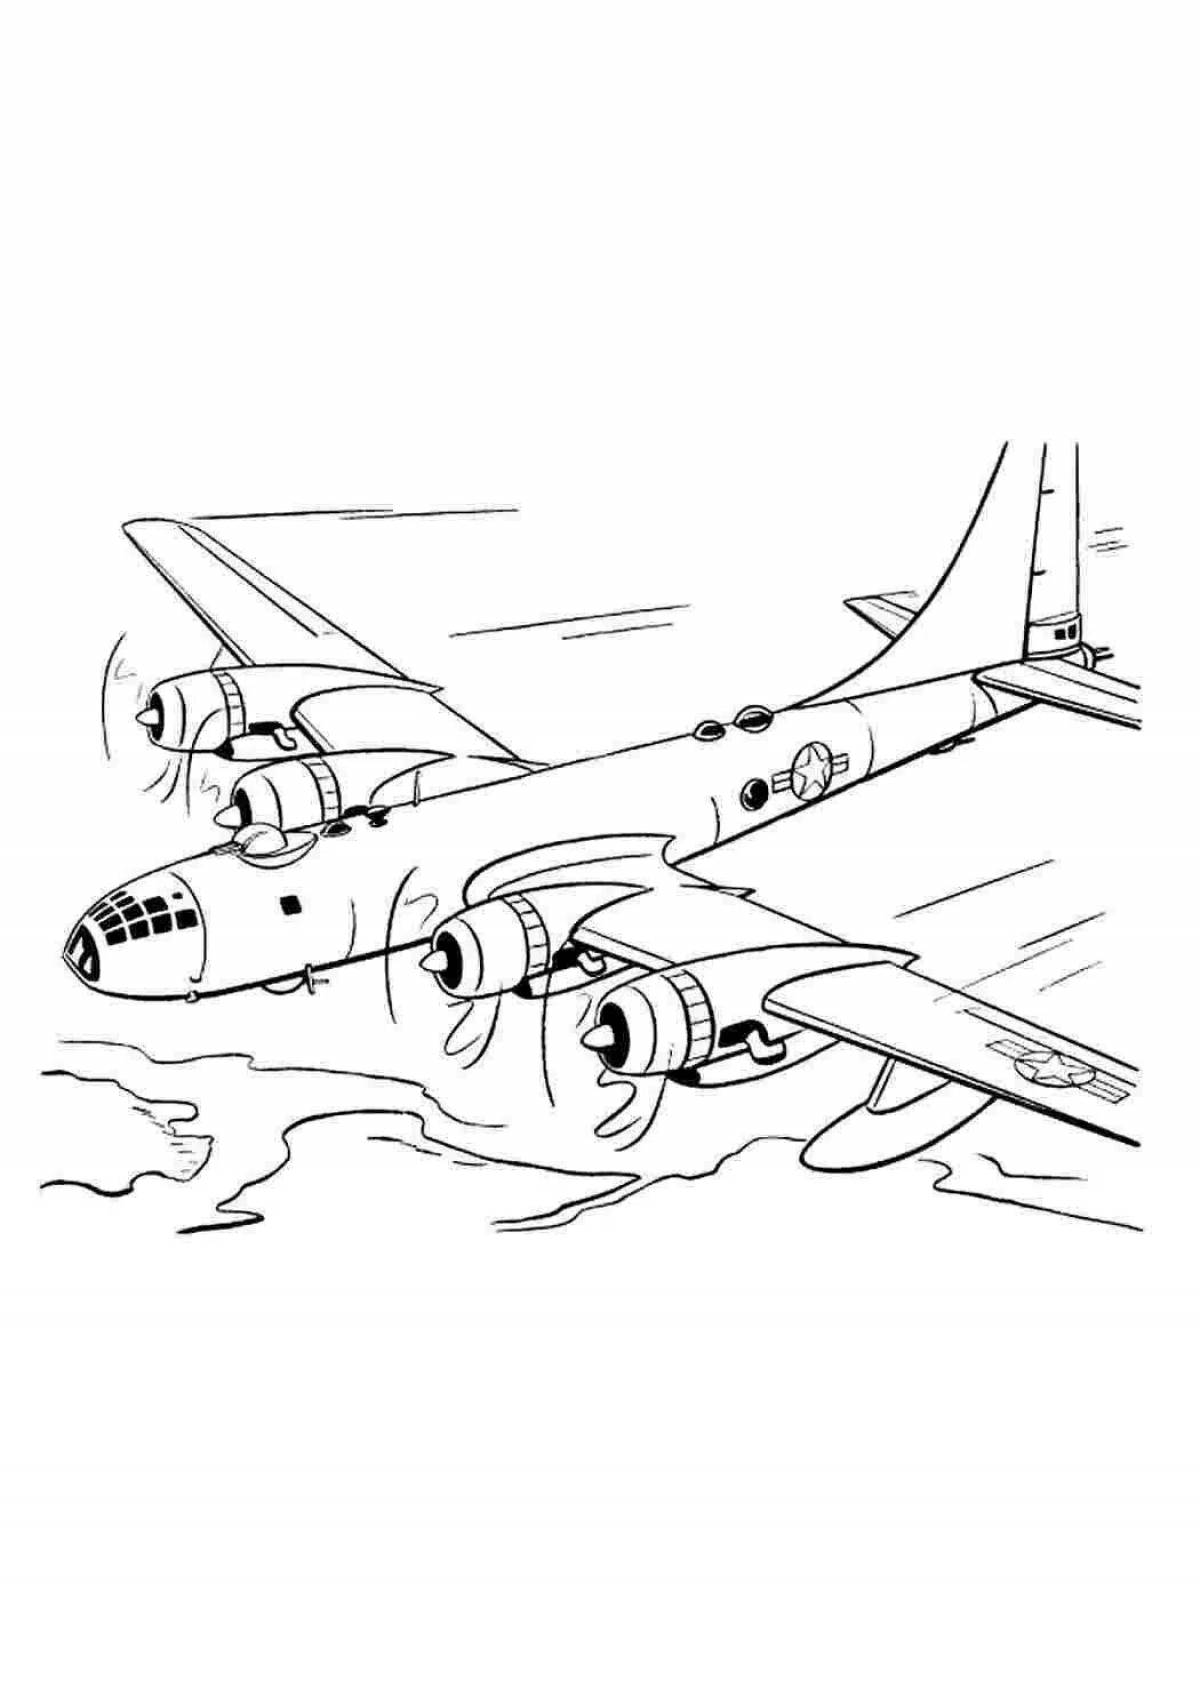 Awesome war thunder coloring book